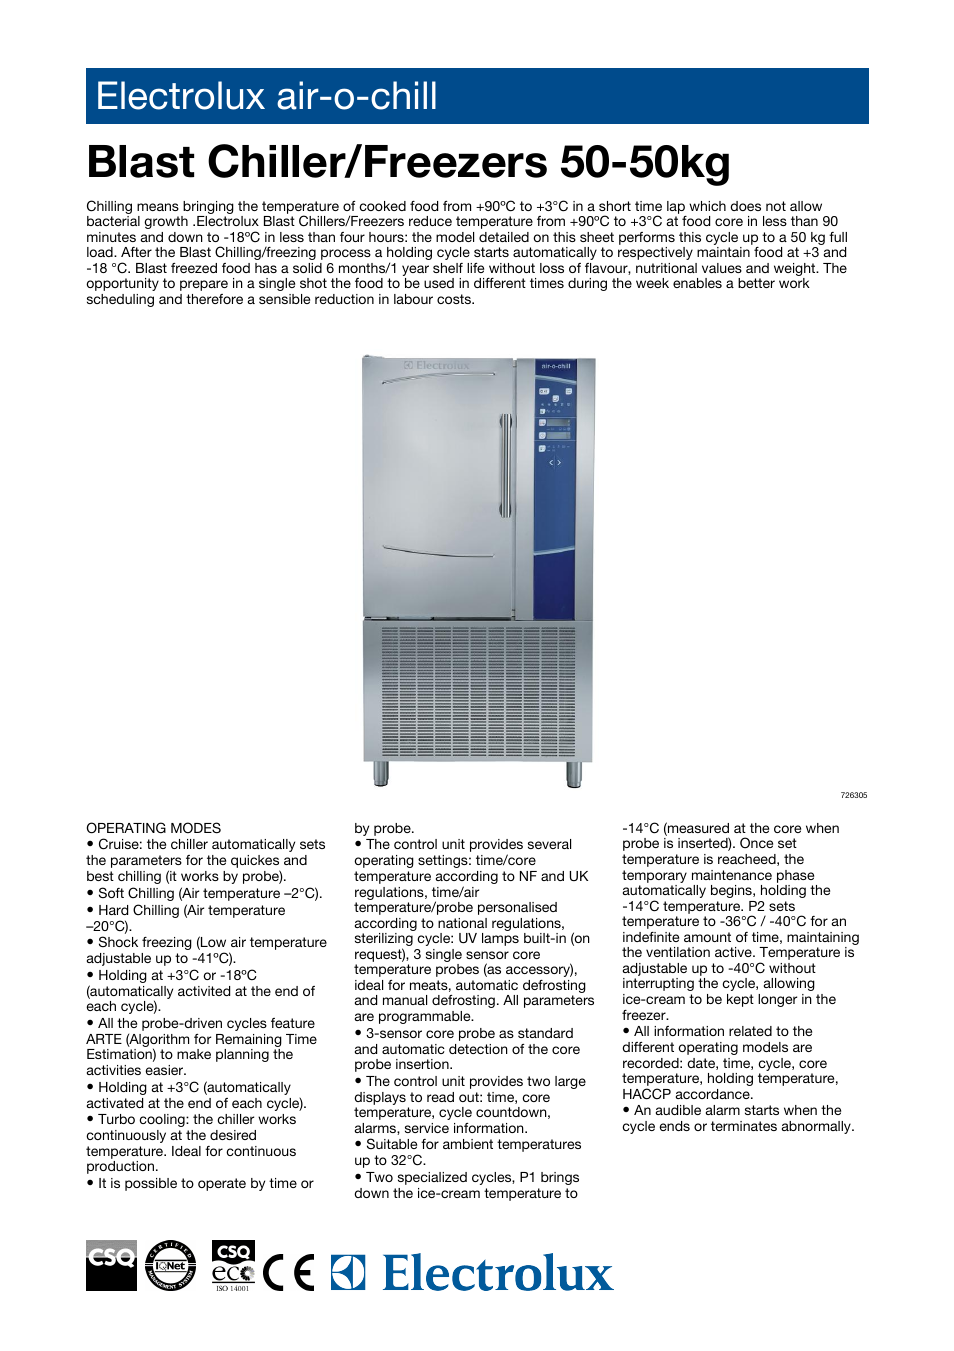 Electrolux Air-O-Chill 726750 User Manual | 4 pages | Also for: Air-O-Chill  726749